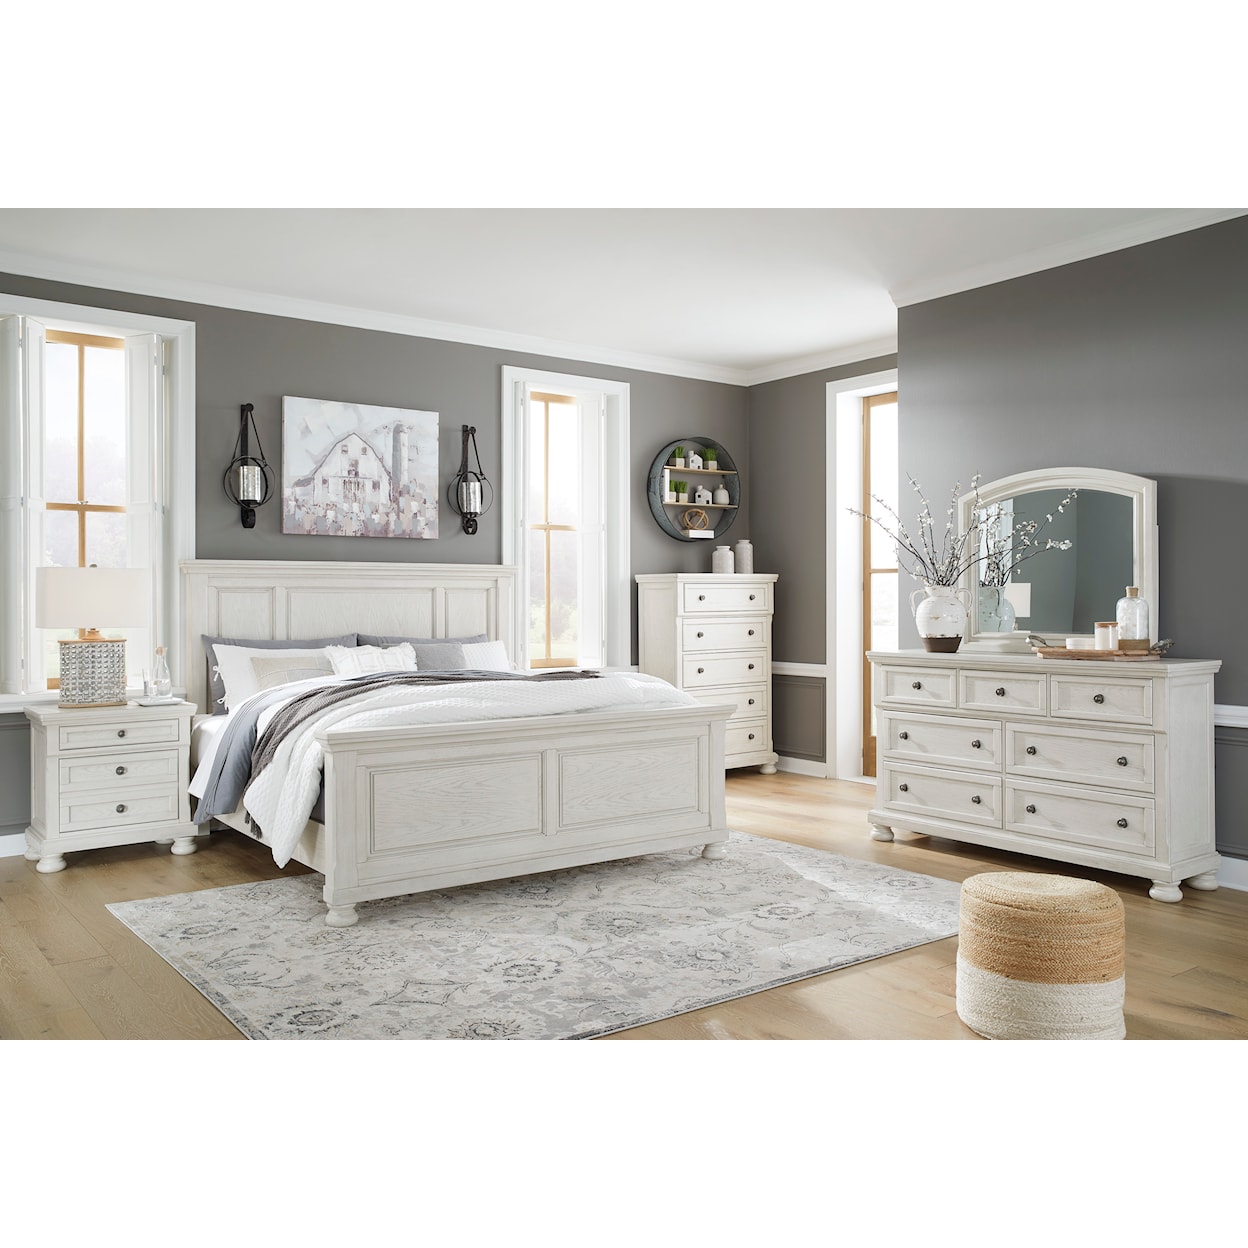 Signature Design by Ashley Robbinsdale King Bedroom Group